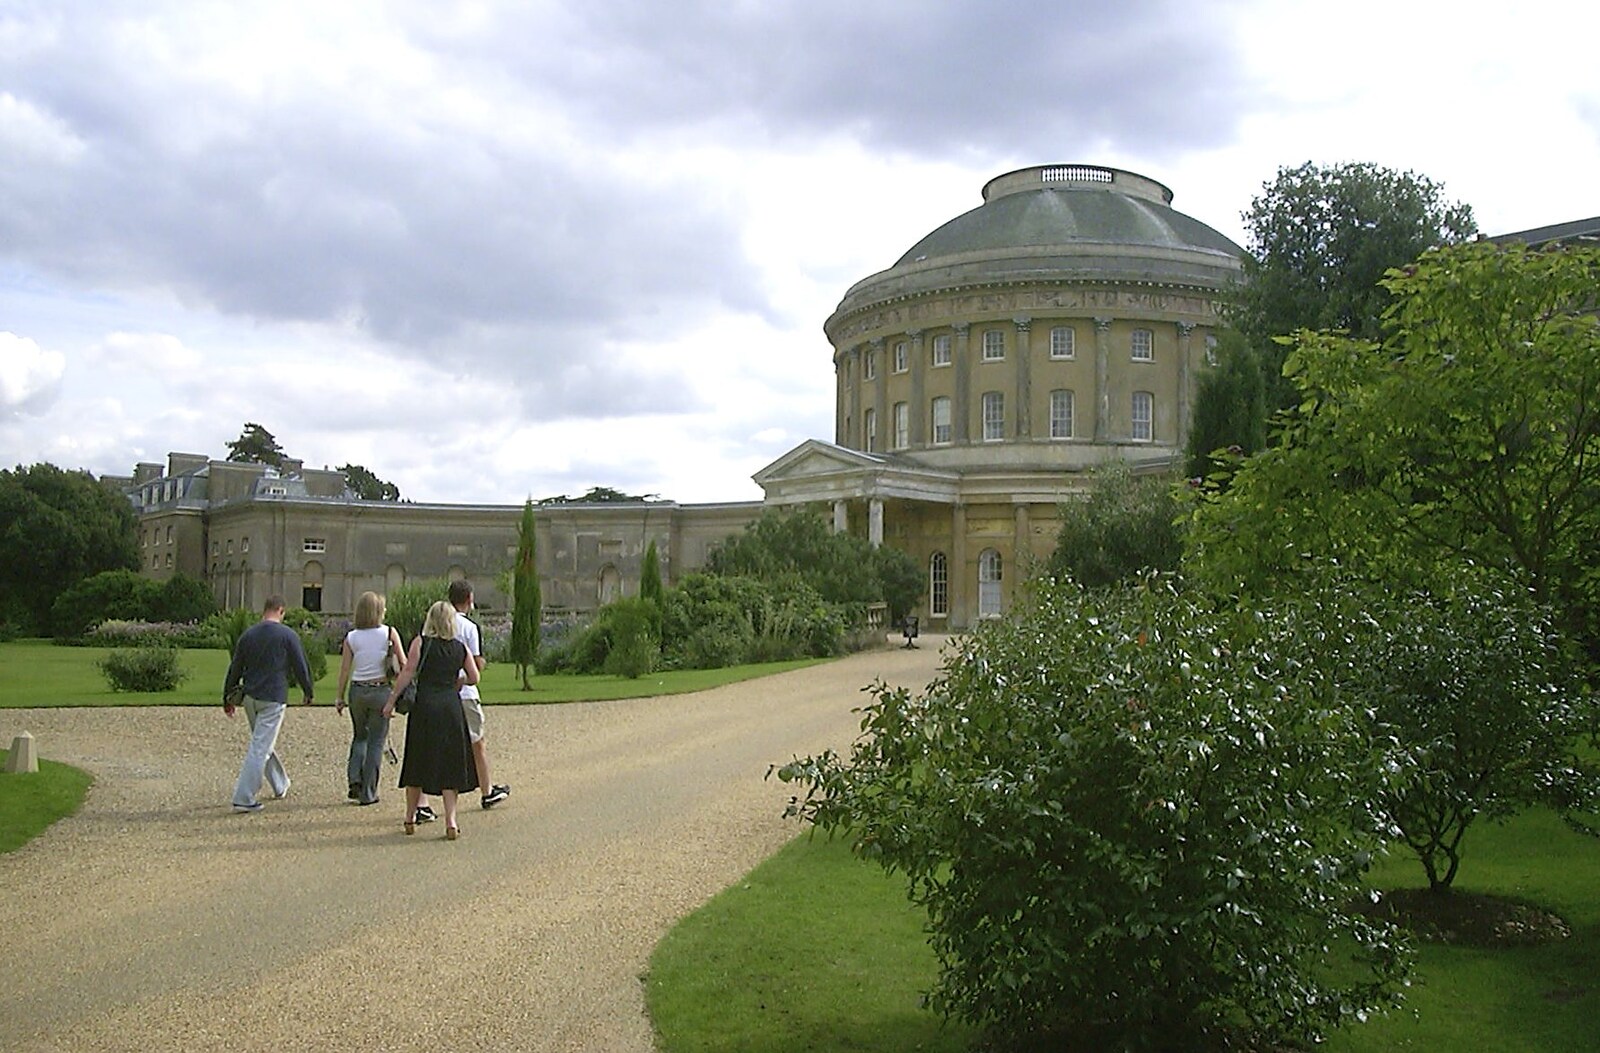 Another view of the Ickworth Rotunda from A Trip to Ickworth House, Horringer, Suffolk - 22nd August 2004